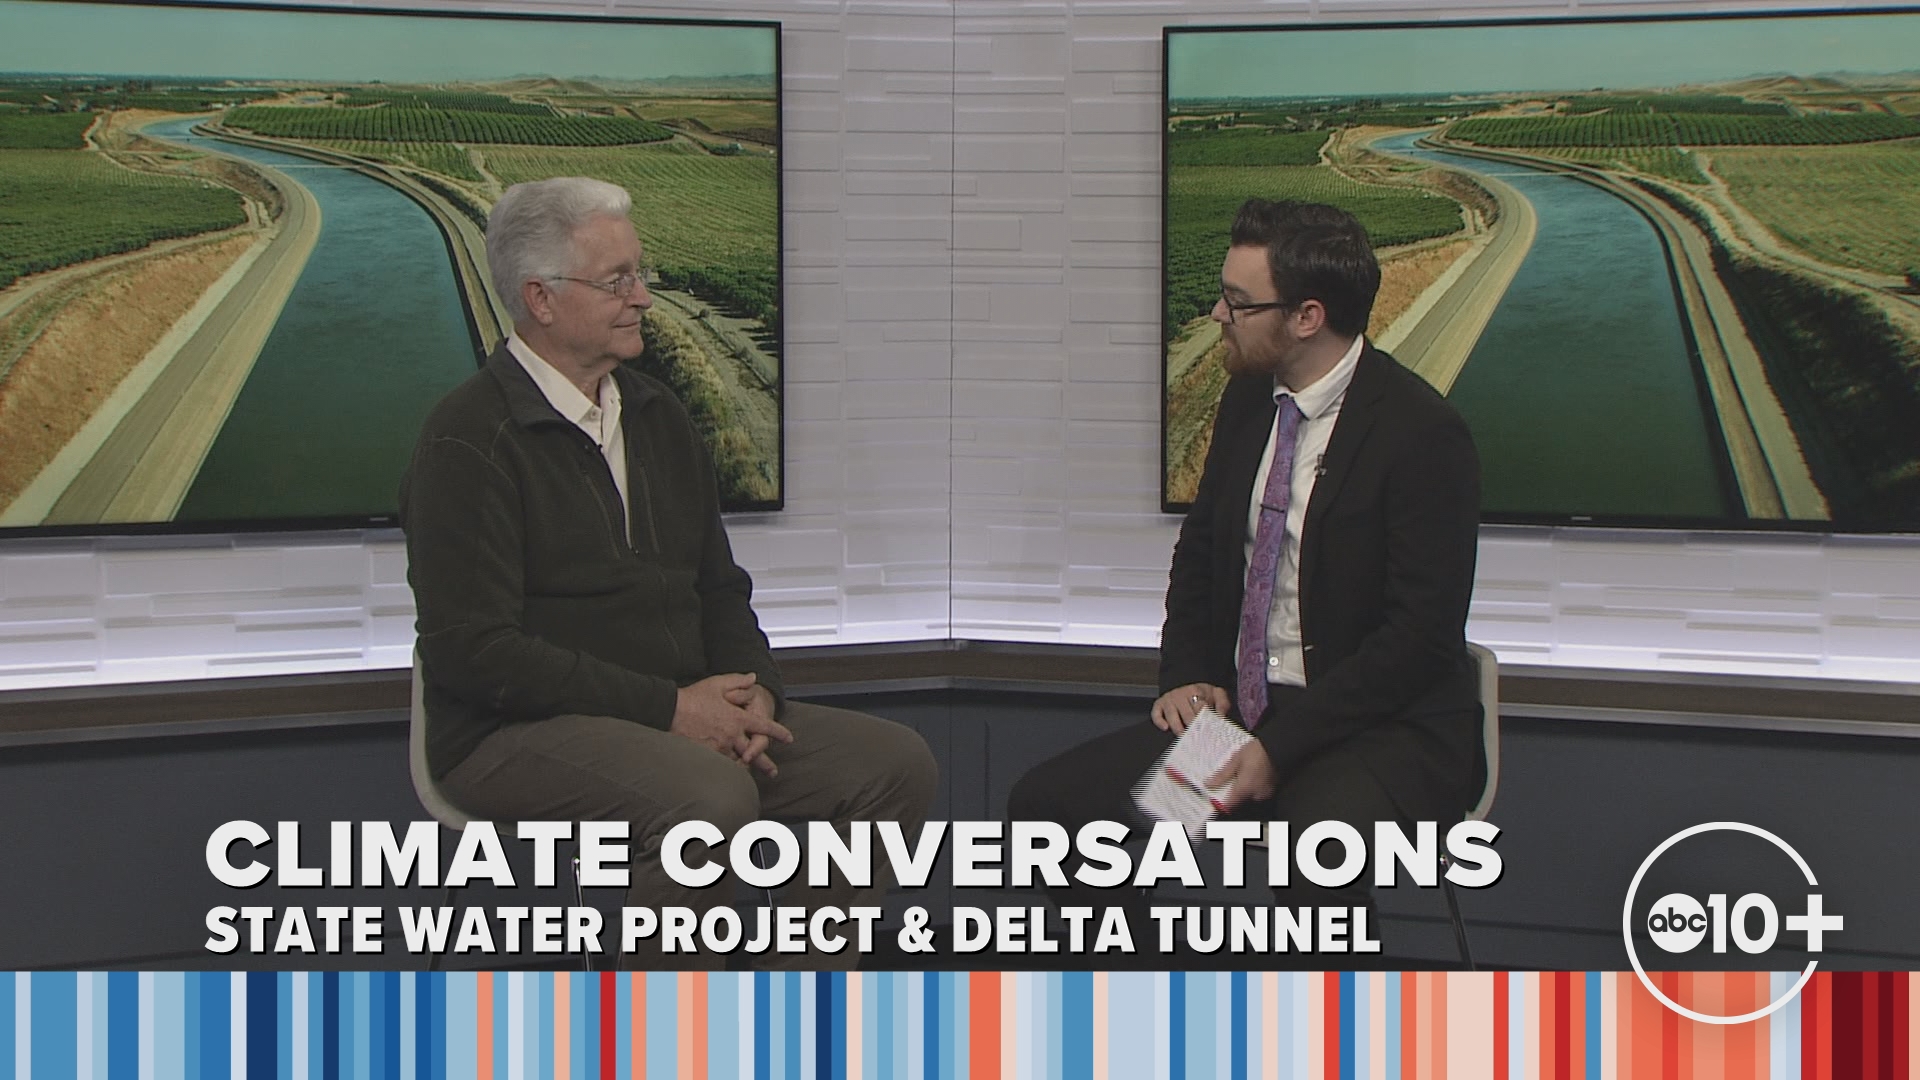 In this Climate Conversation, Tony Meyers sits down with ABC10 to discuss the State Water Project, the future of water transport, and the latest on the Delta Tunnel.